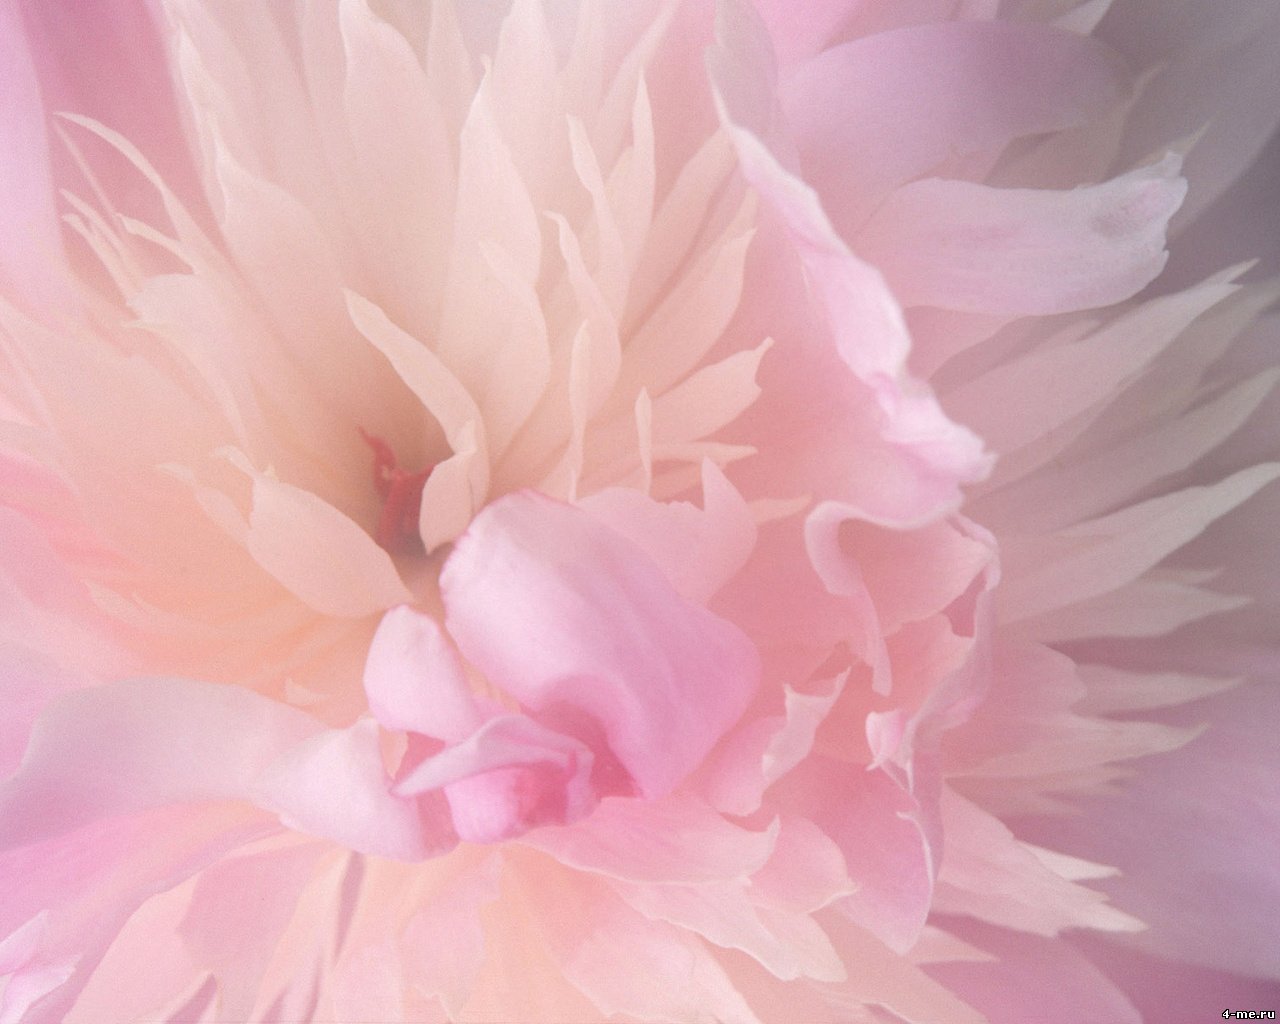 Pink Flower Wallpapers High Quality | Download Free